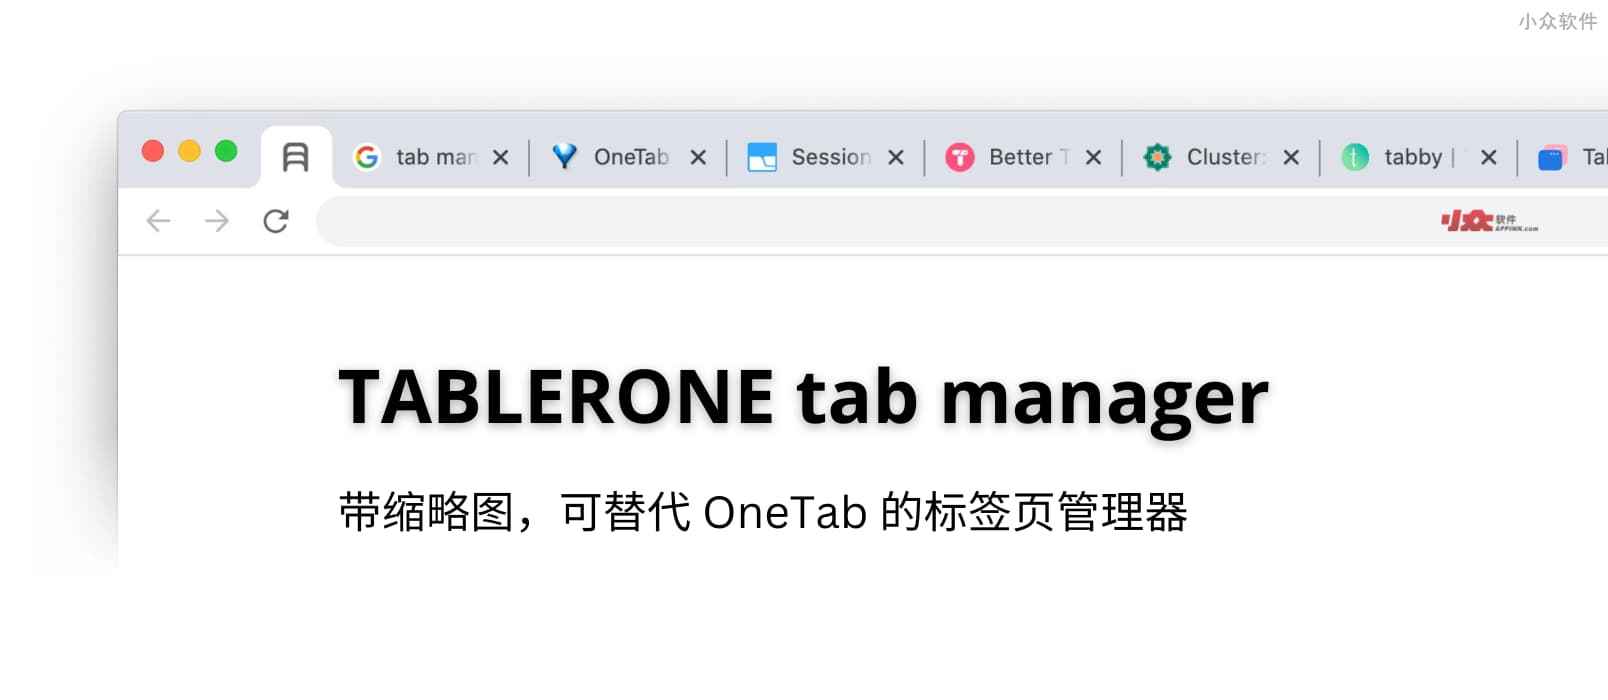 TABLERONE tab manager - 带缩略图，可替代 OneTab 的标签页管理器[Chrome]